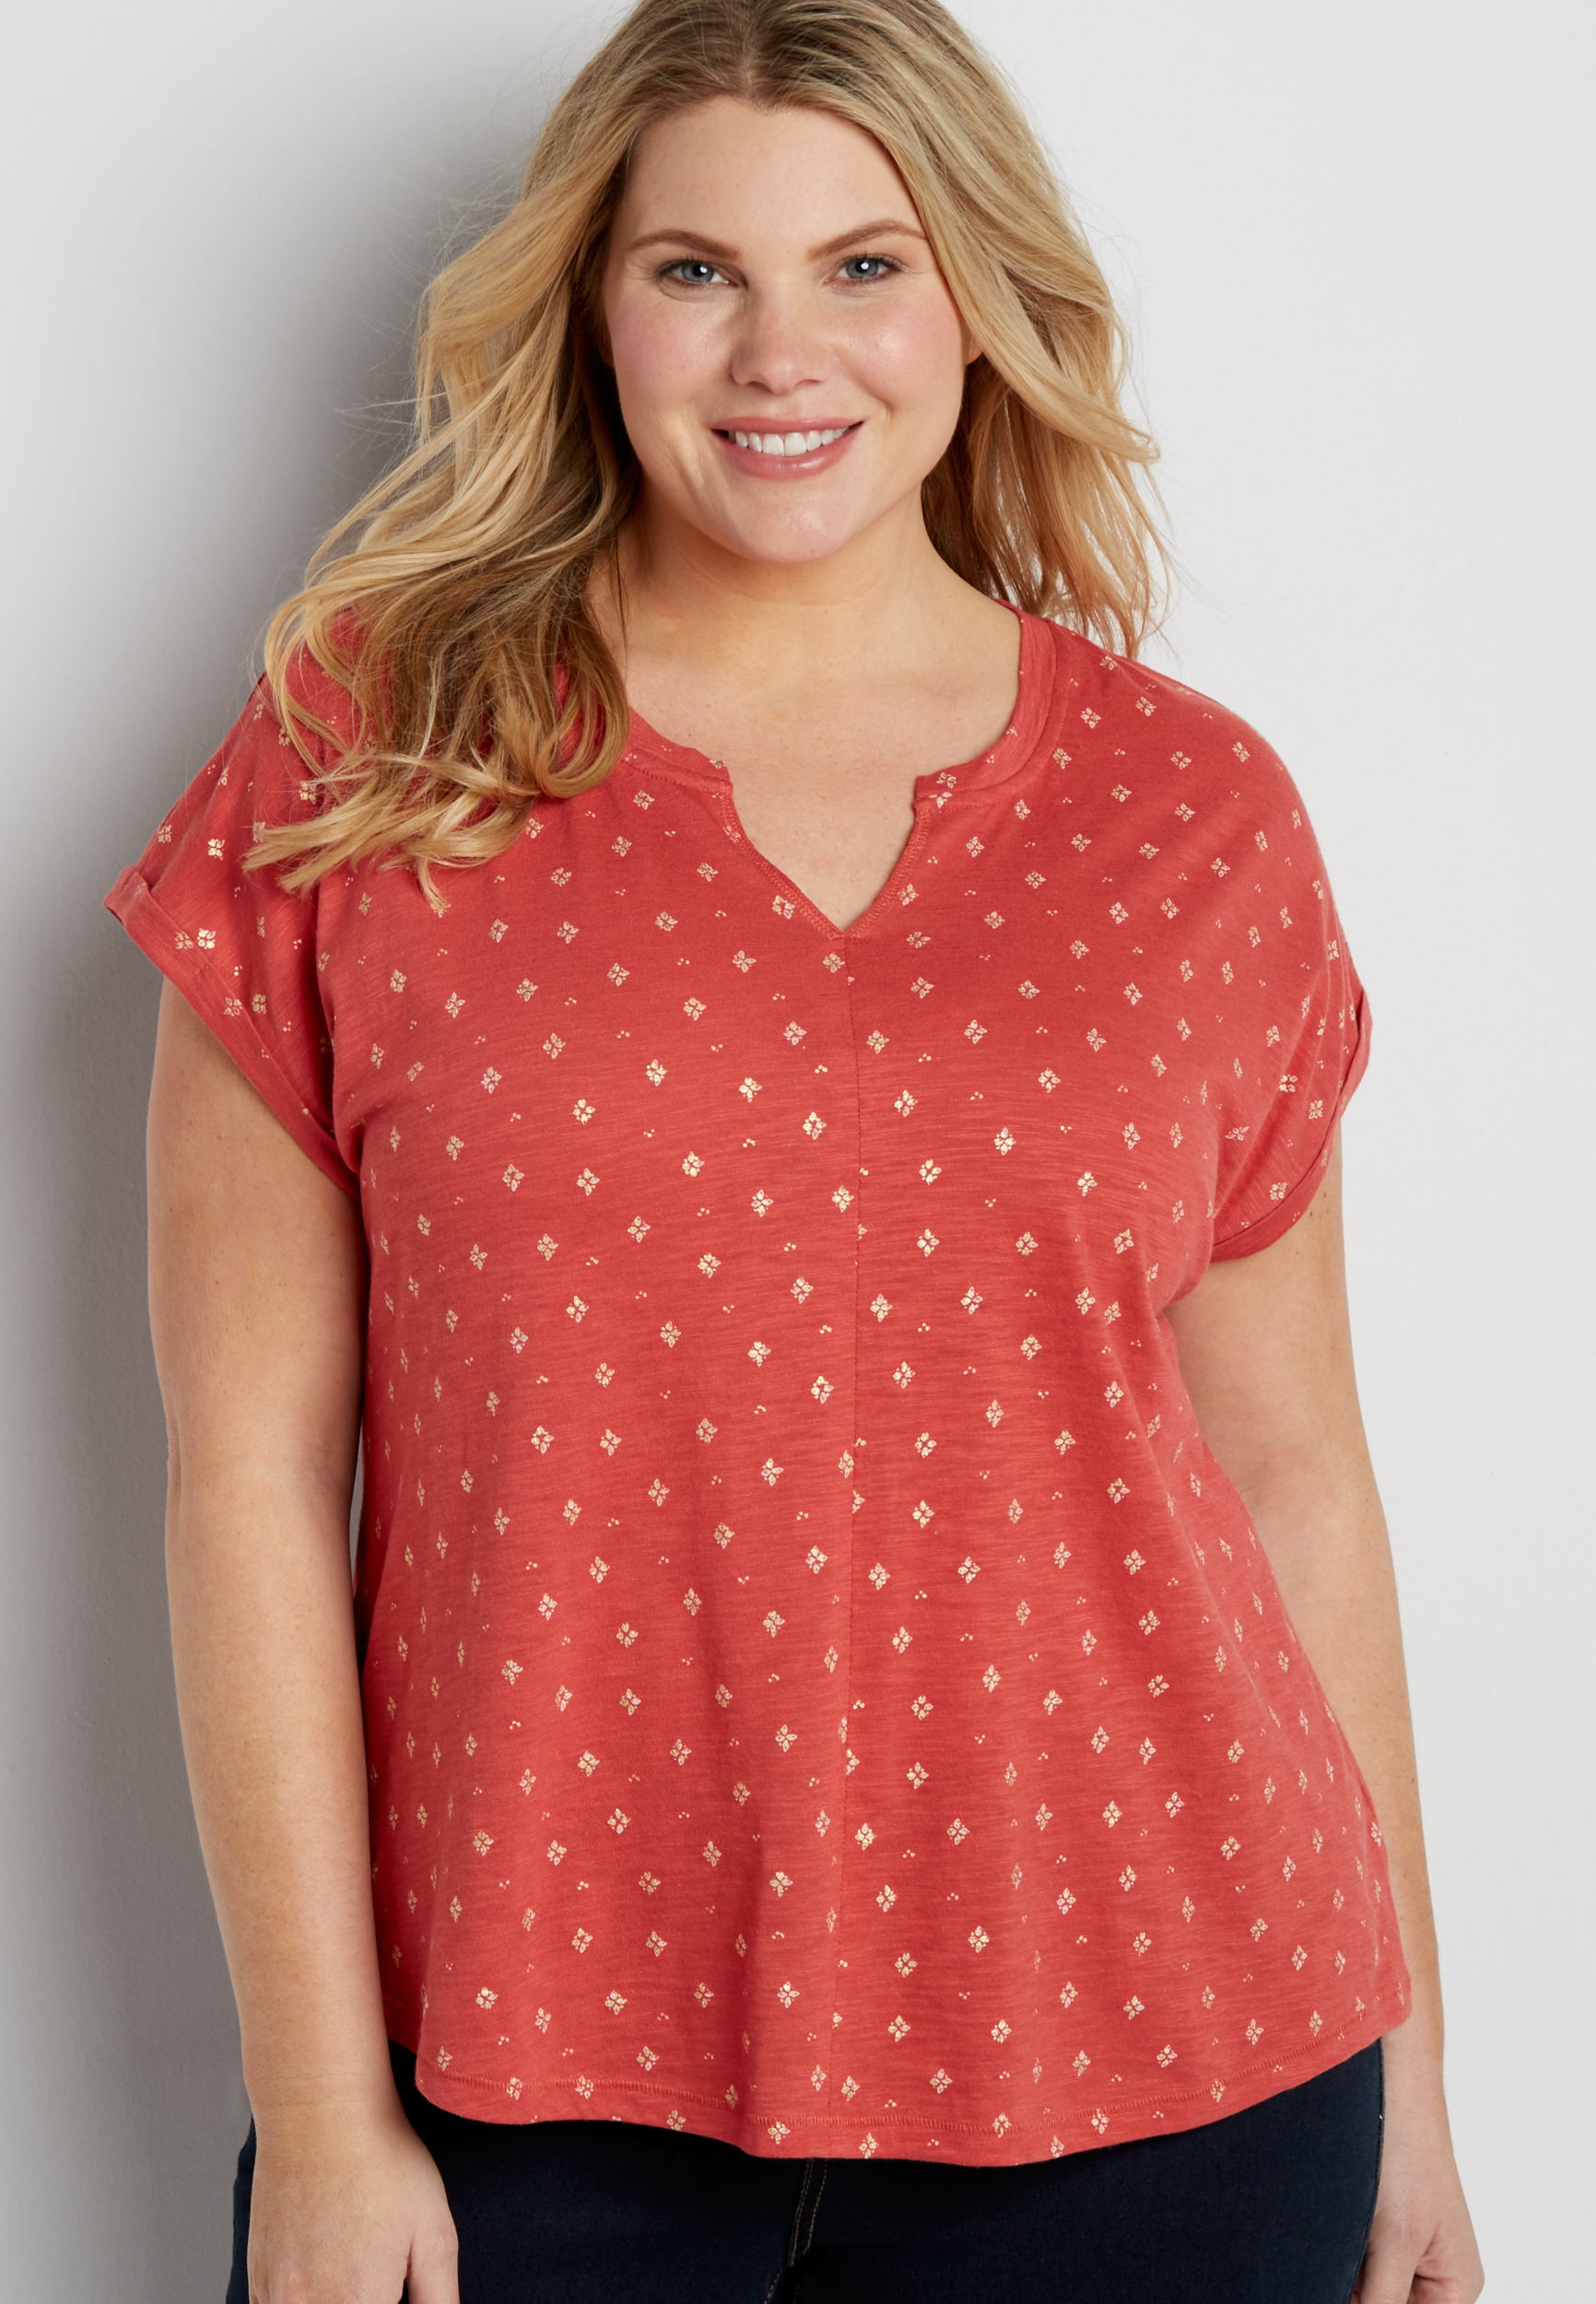 the 24/7 plus size patterned tee with split neckline | maurices